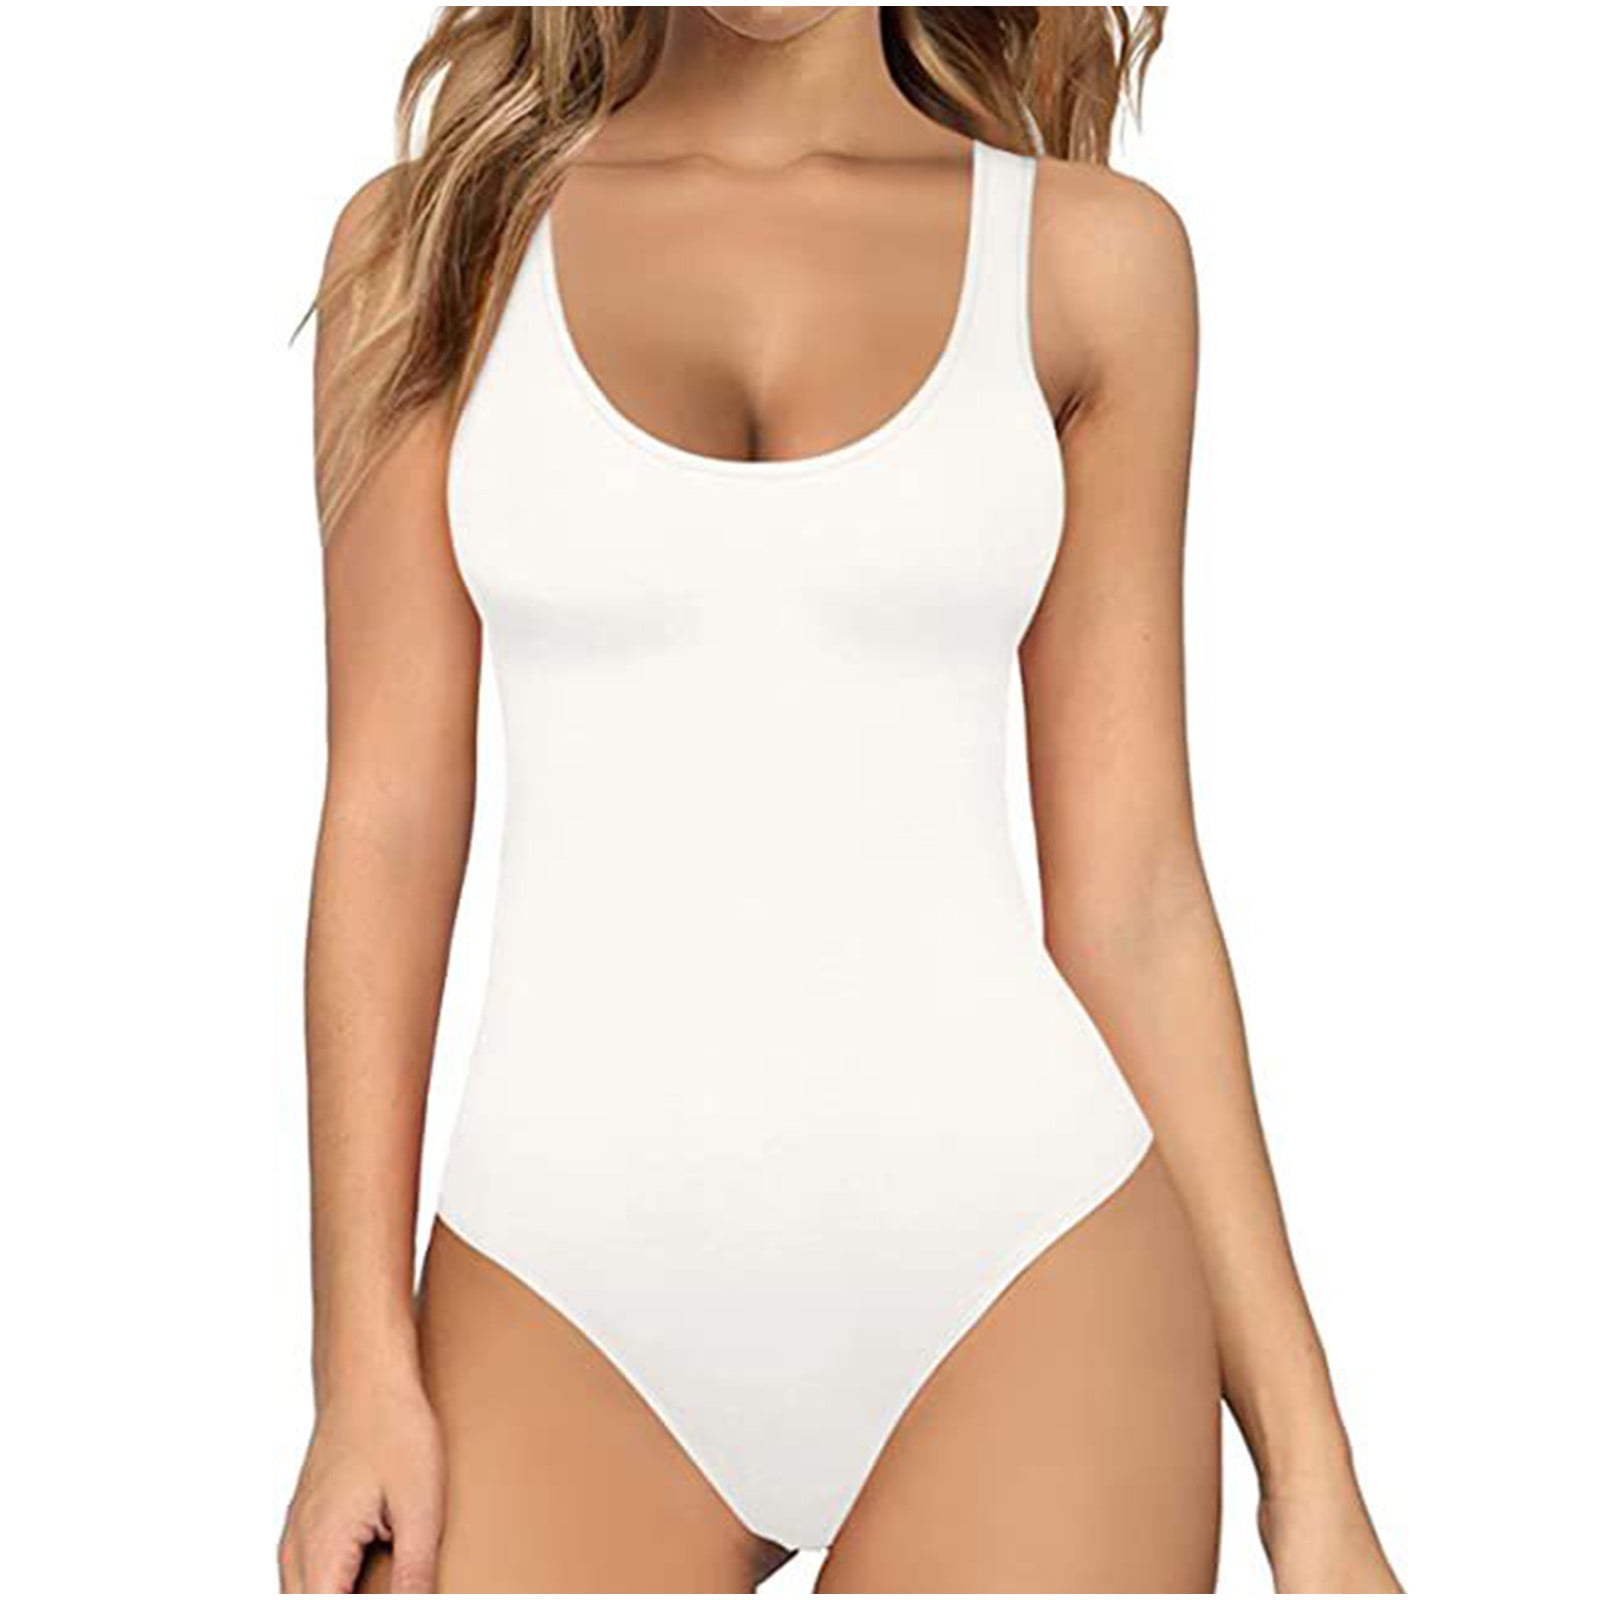 Black and Friday Deals Clearance under $10 Charella One-Piece Bodysuits for  Women U-Neck Sleeveless Solid Shapewear Slim Bodysuit Jumpsuits White,XL